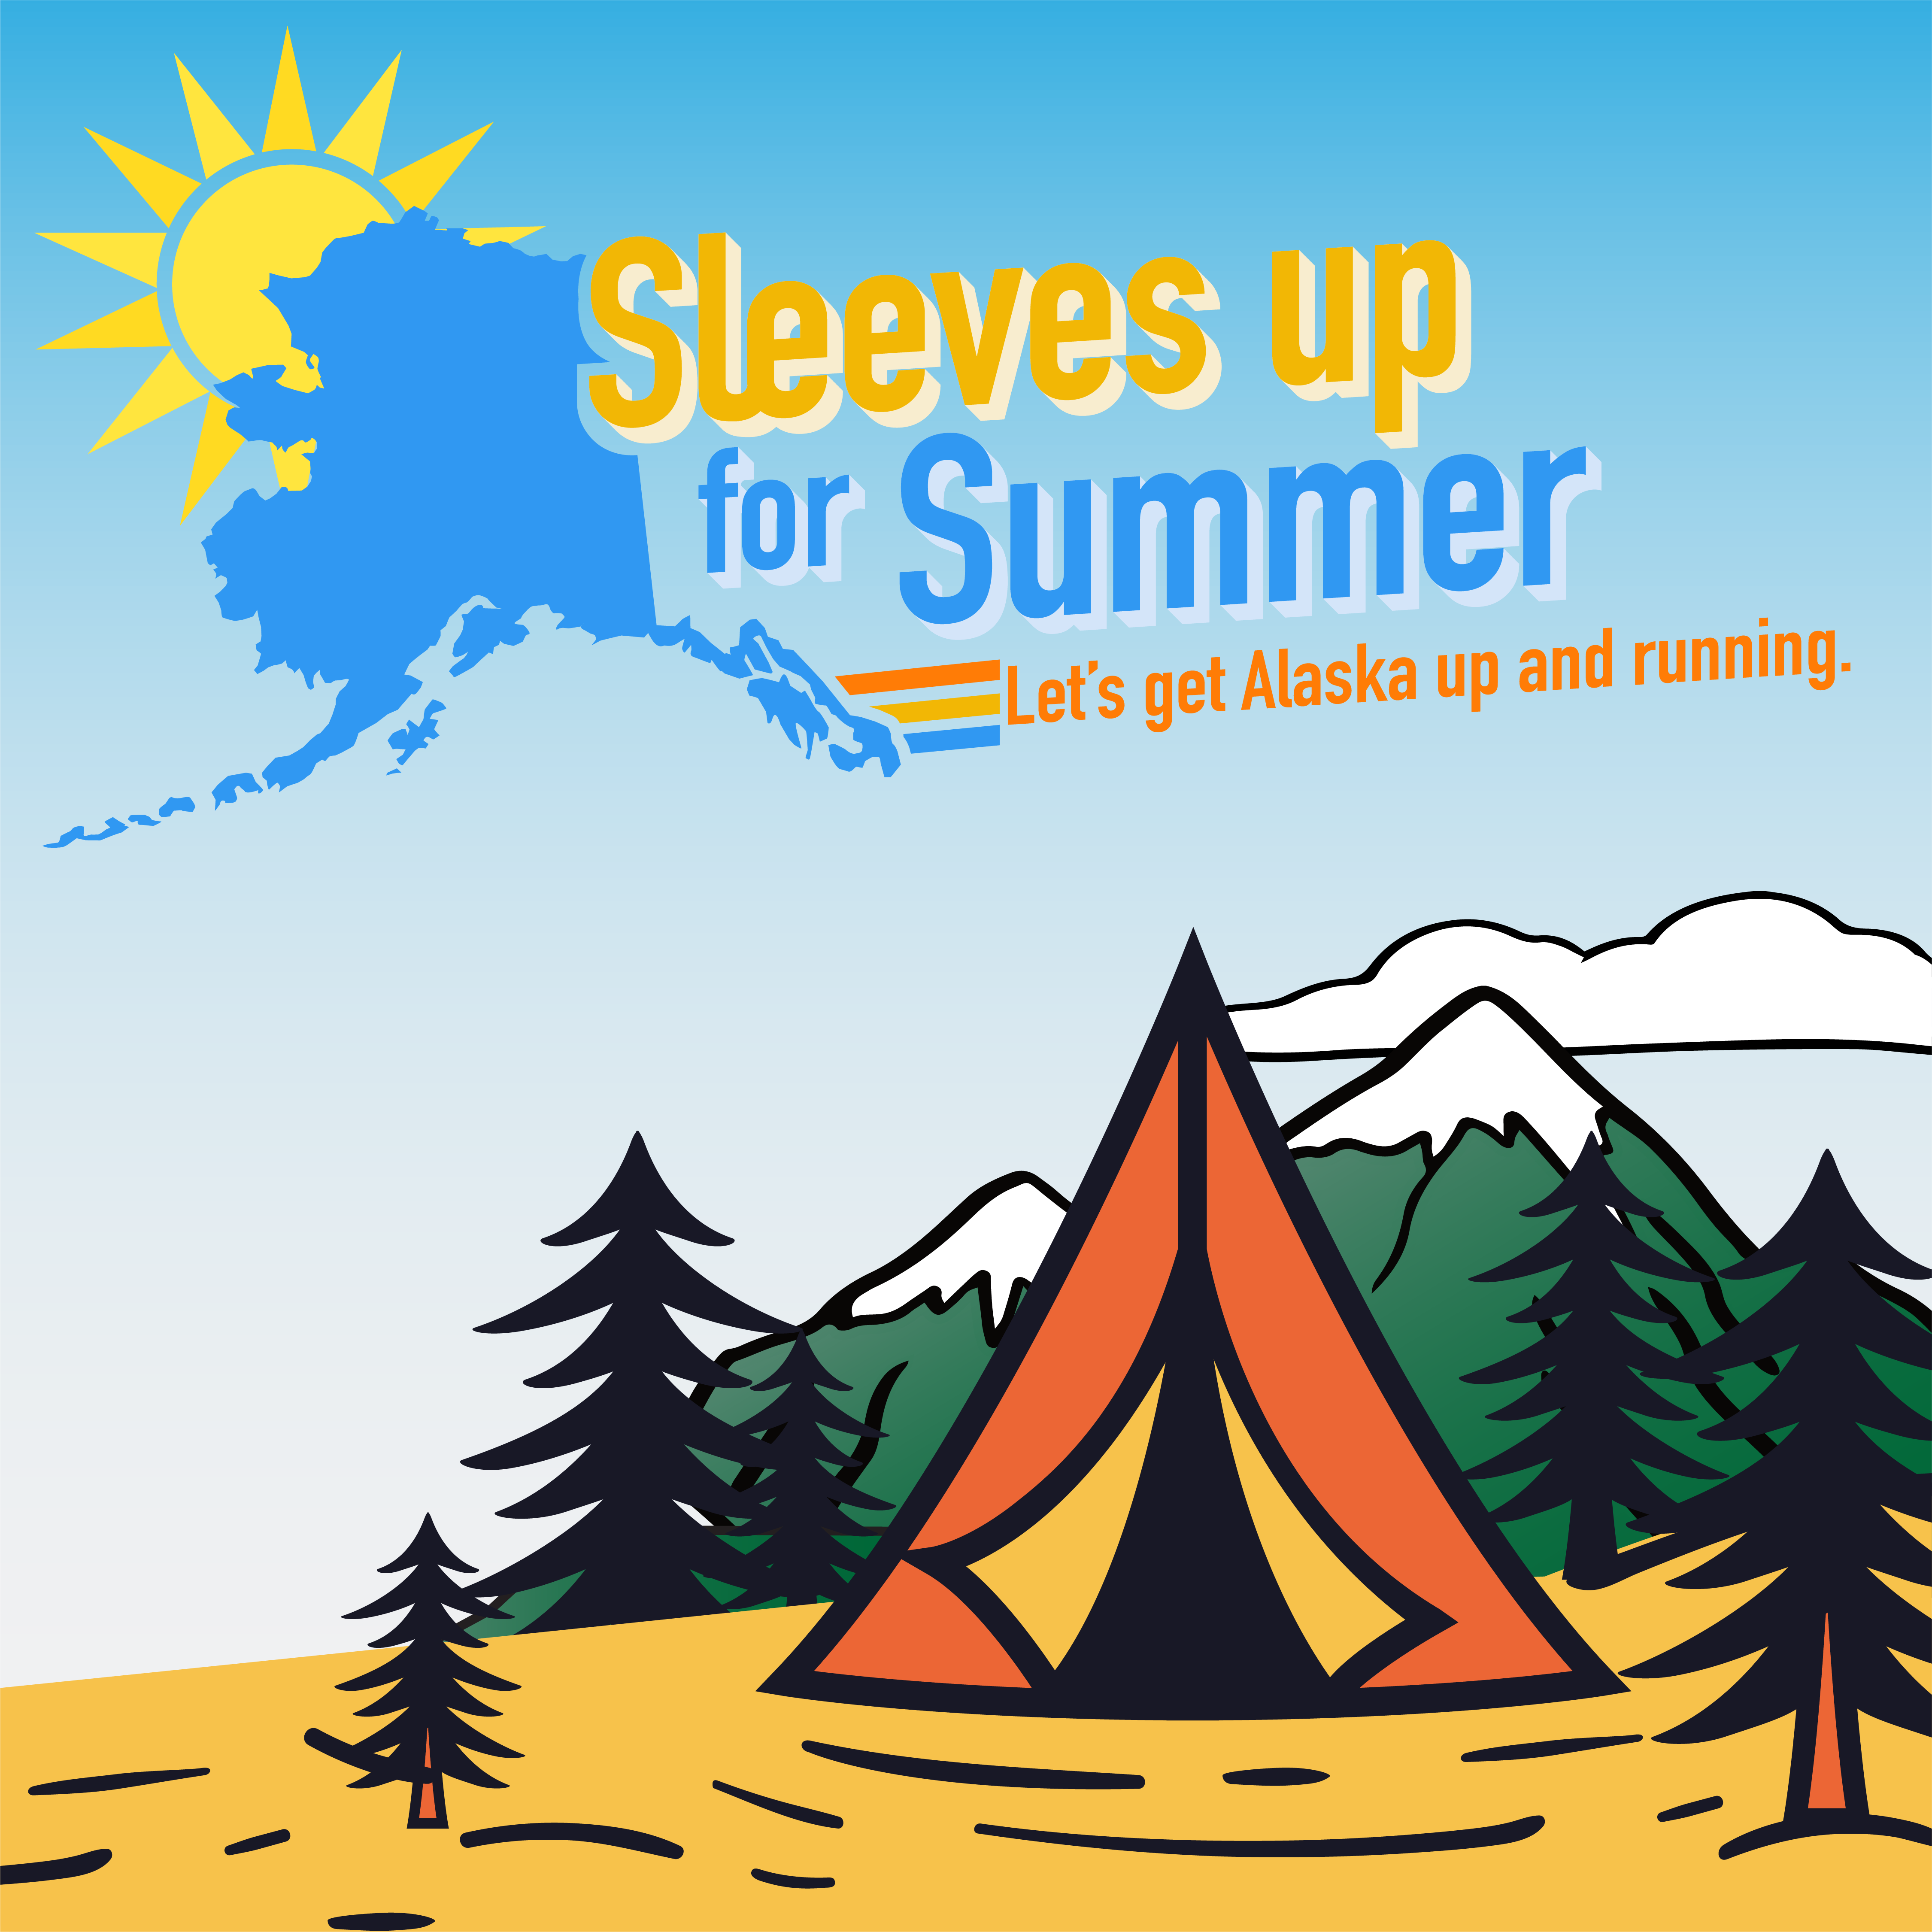 Sleeves up for summer: Camping - Instagram